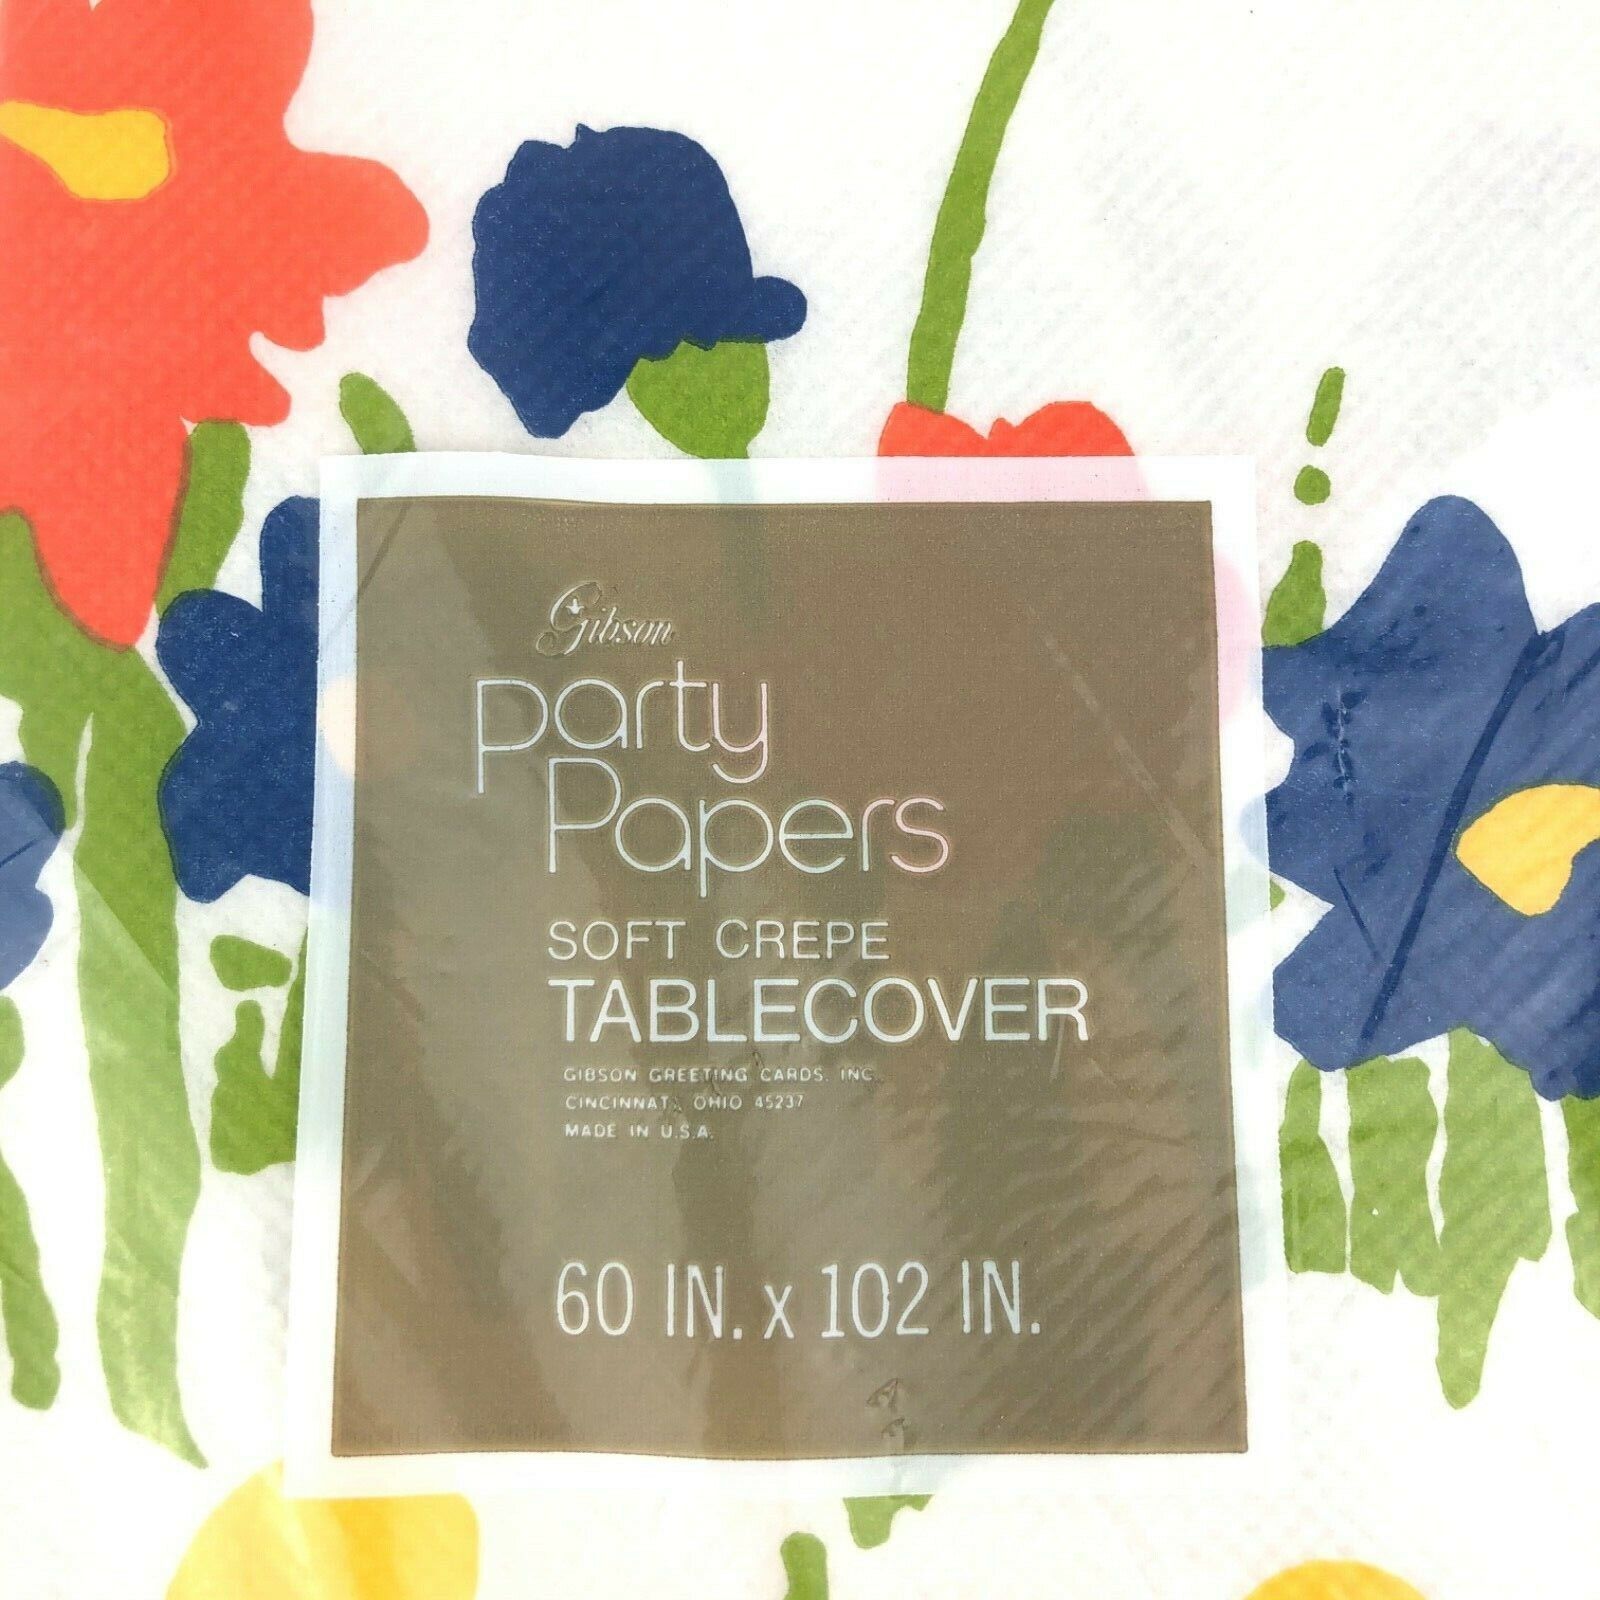 Soft Crepe Tablecover Table Cloth 60" x 102" Abstract Flower Gibson Party Papers - $17.56